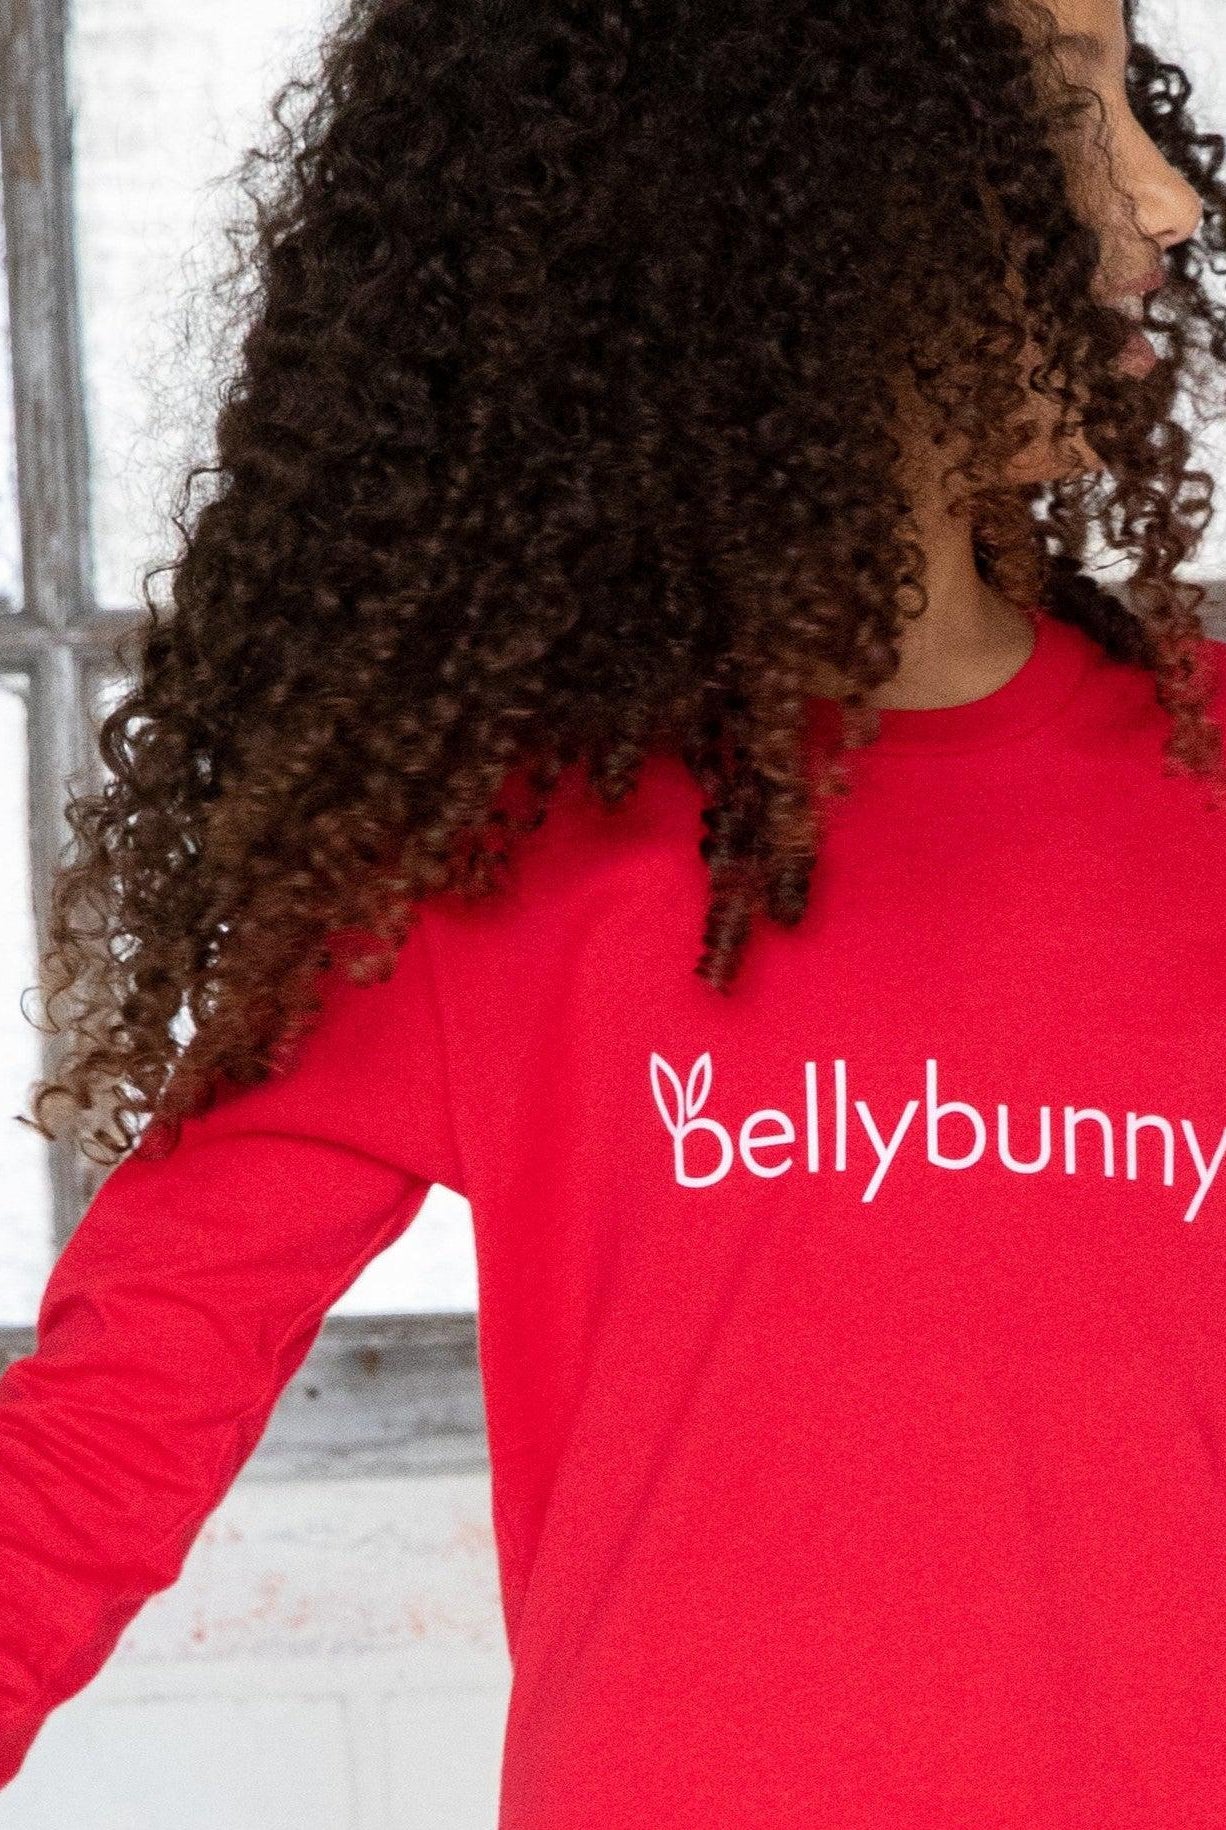 Bellybunny-Youth Long Sleeve T-Shirt-red with white logo